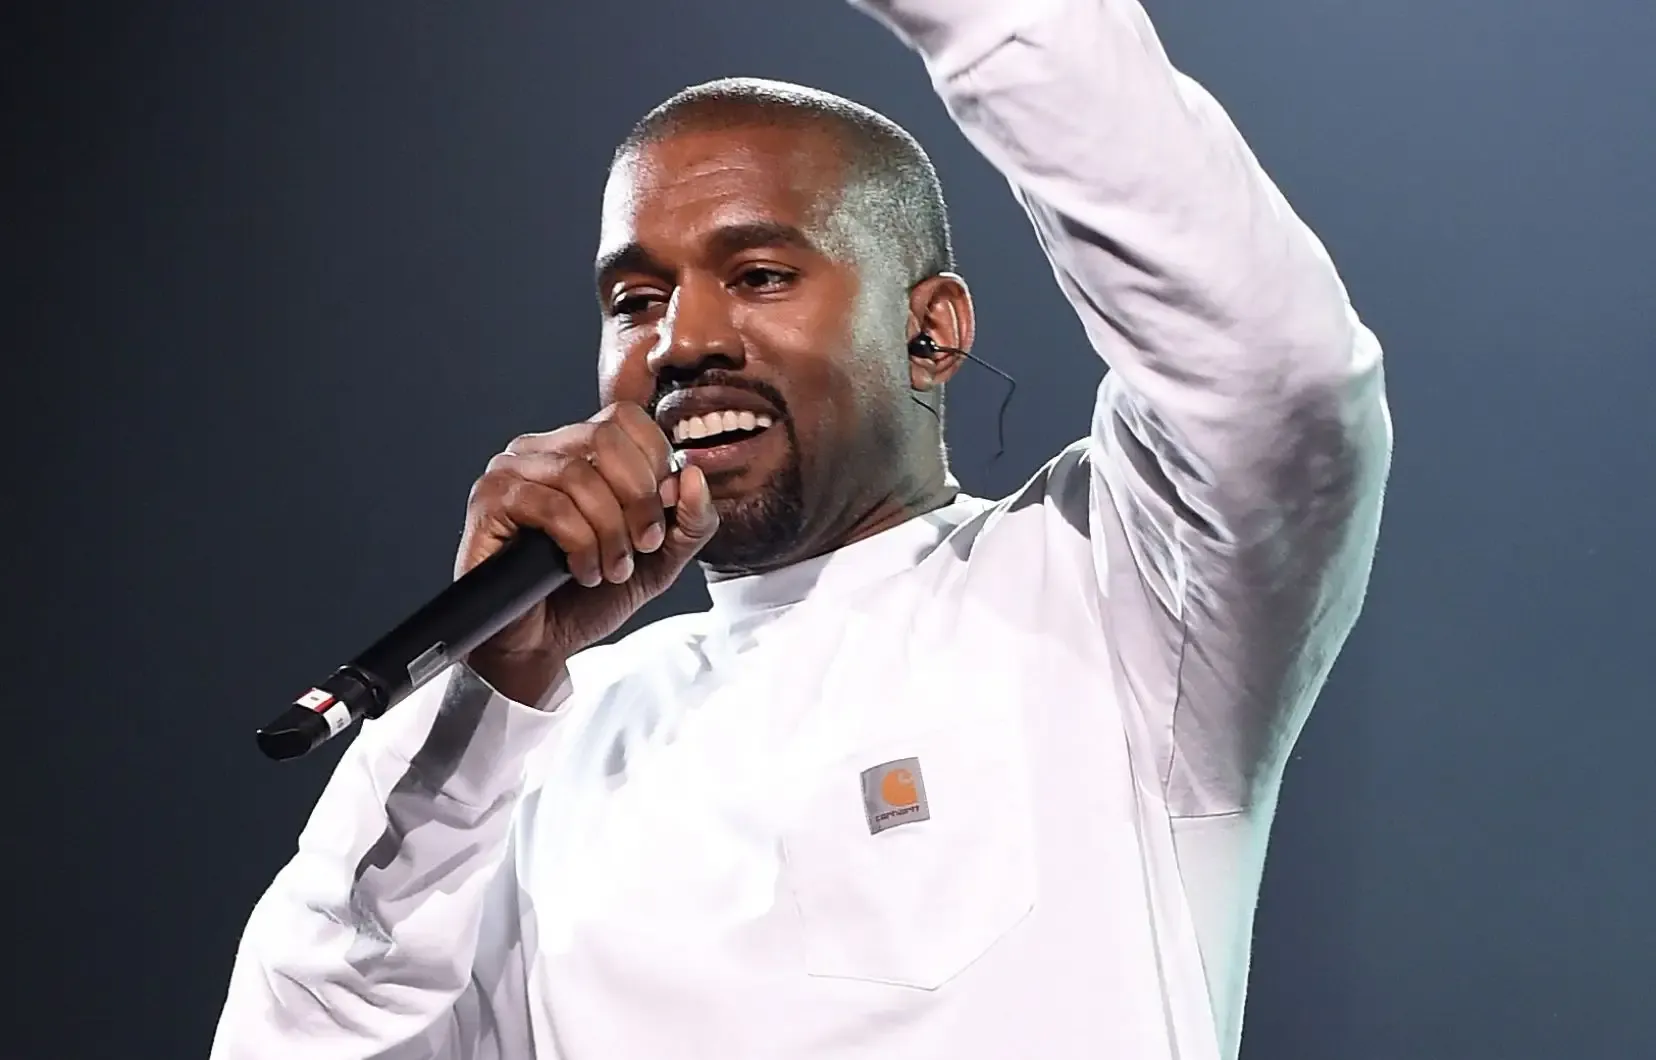 Does Kanye West foresee what music will sound like?